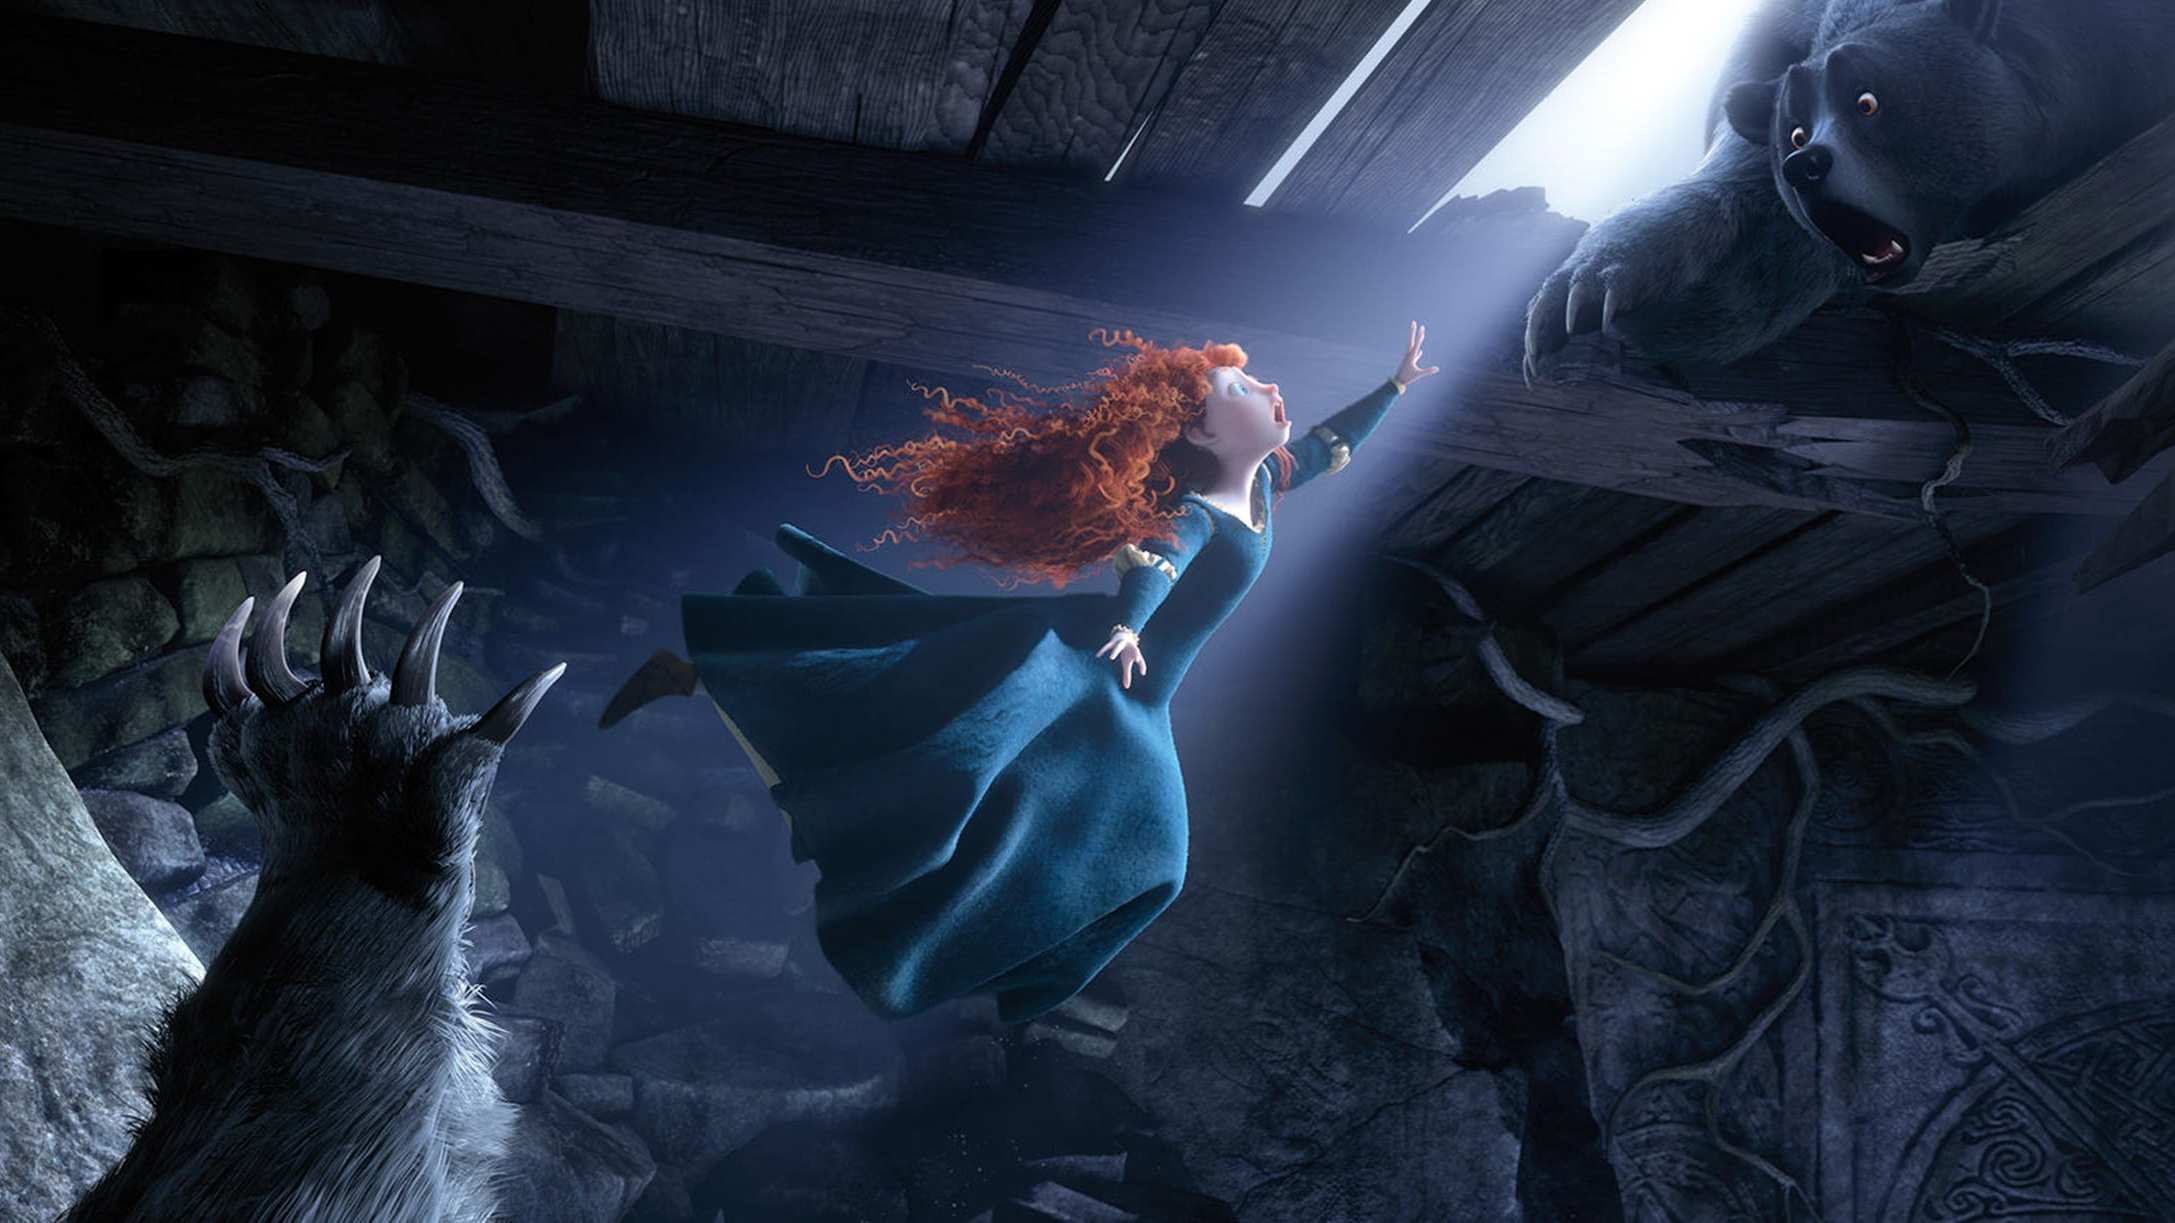 Merida reaches for her mother's help as she tries to escape from the bear.